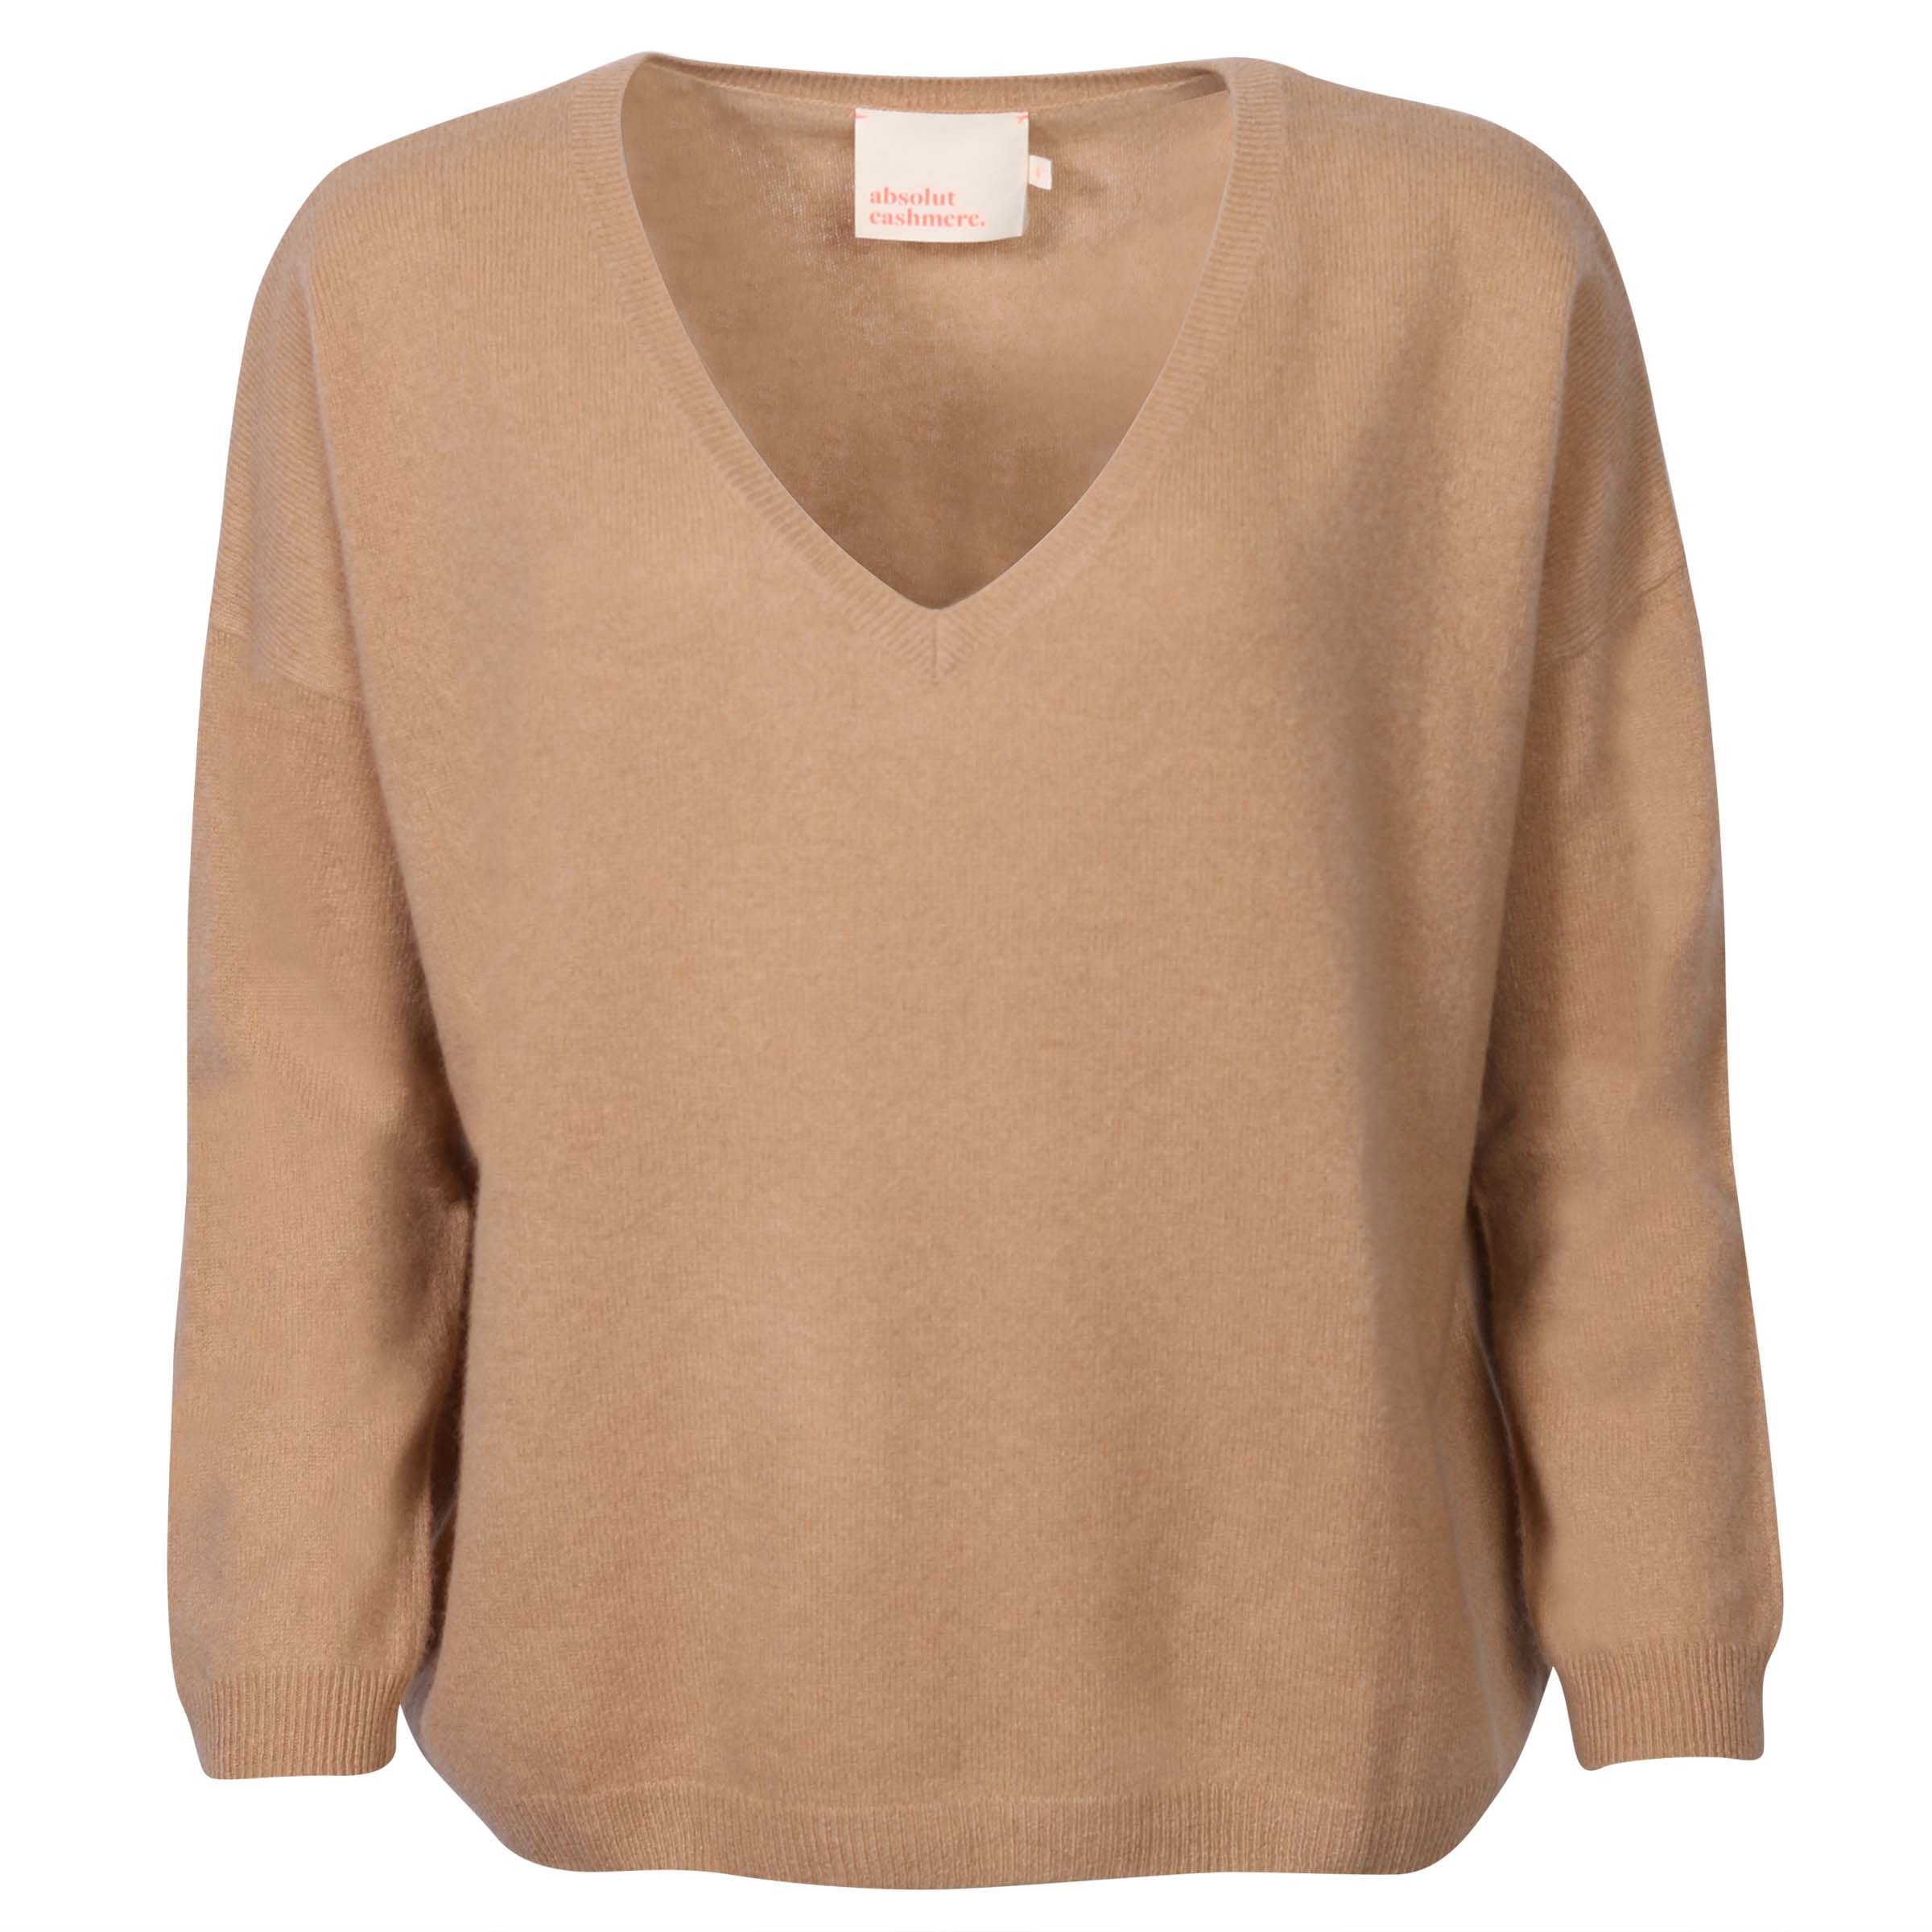 Absolut Cashmere Pullover Angele Camel XS